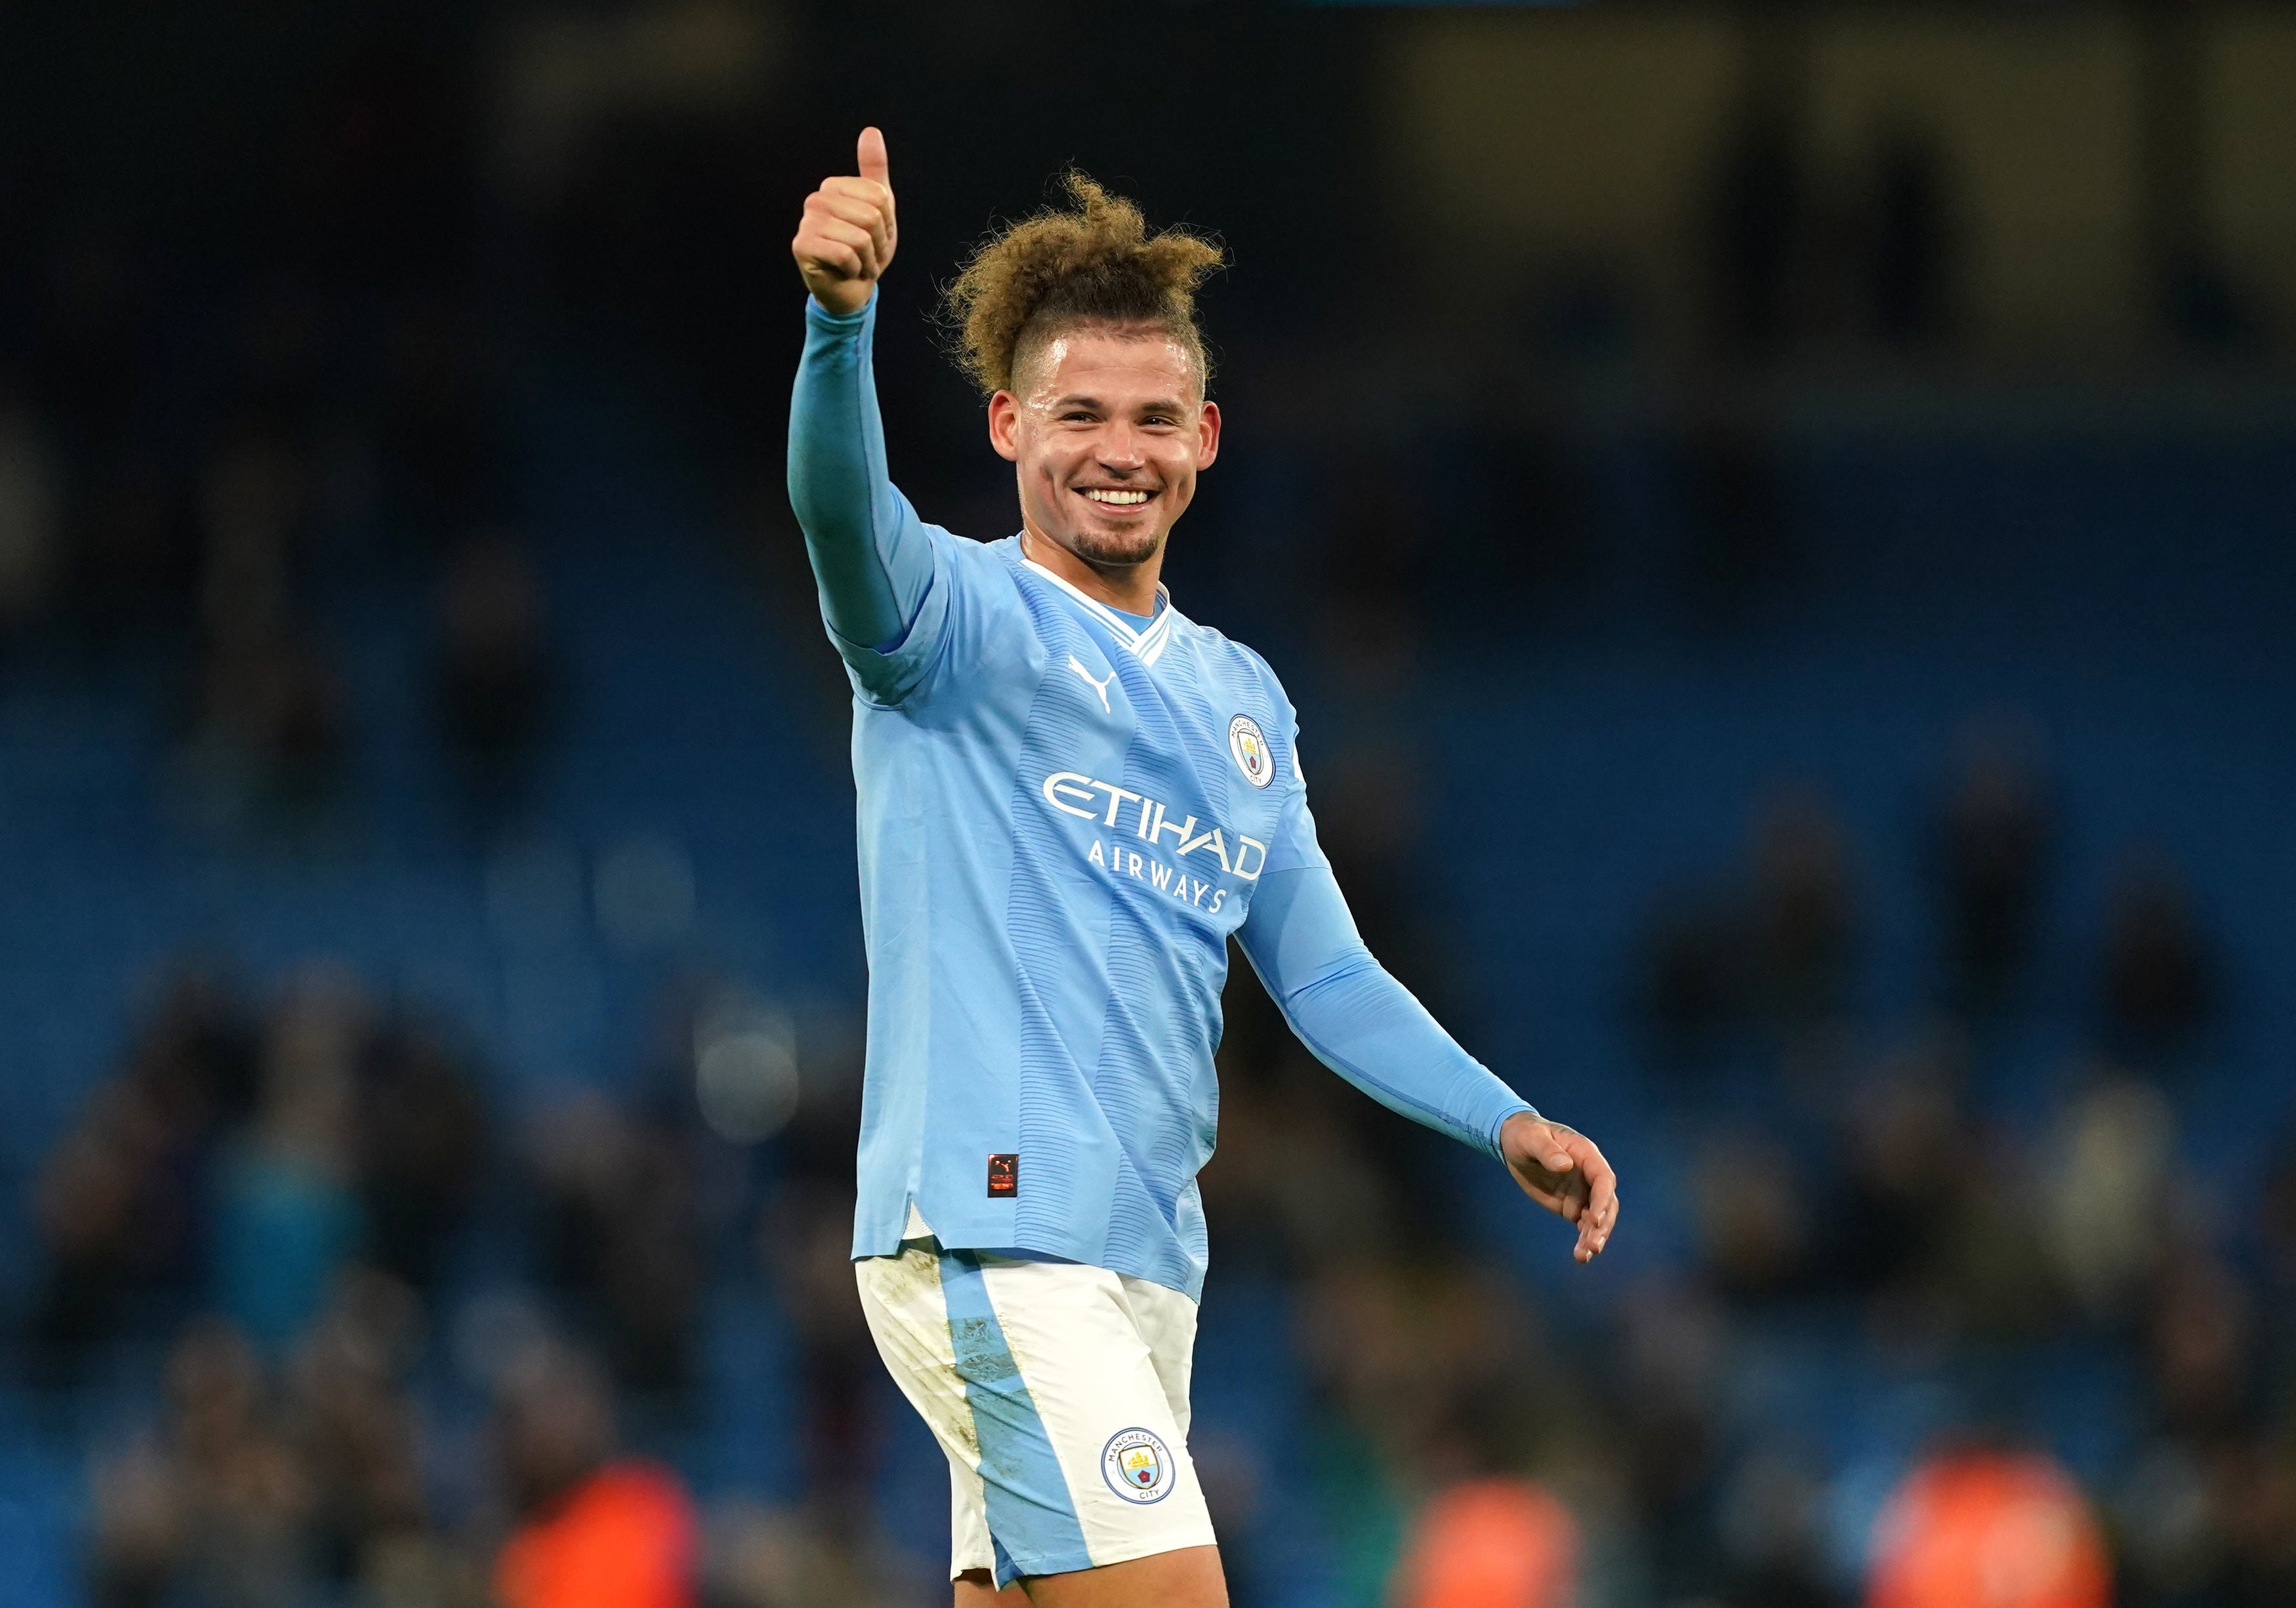 Kalvin Phillips has played just 89 minutes in the Premier League for Manchester City this season